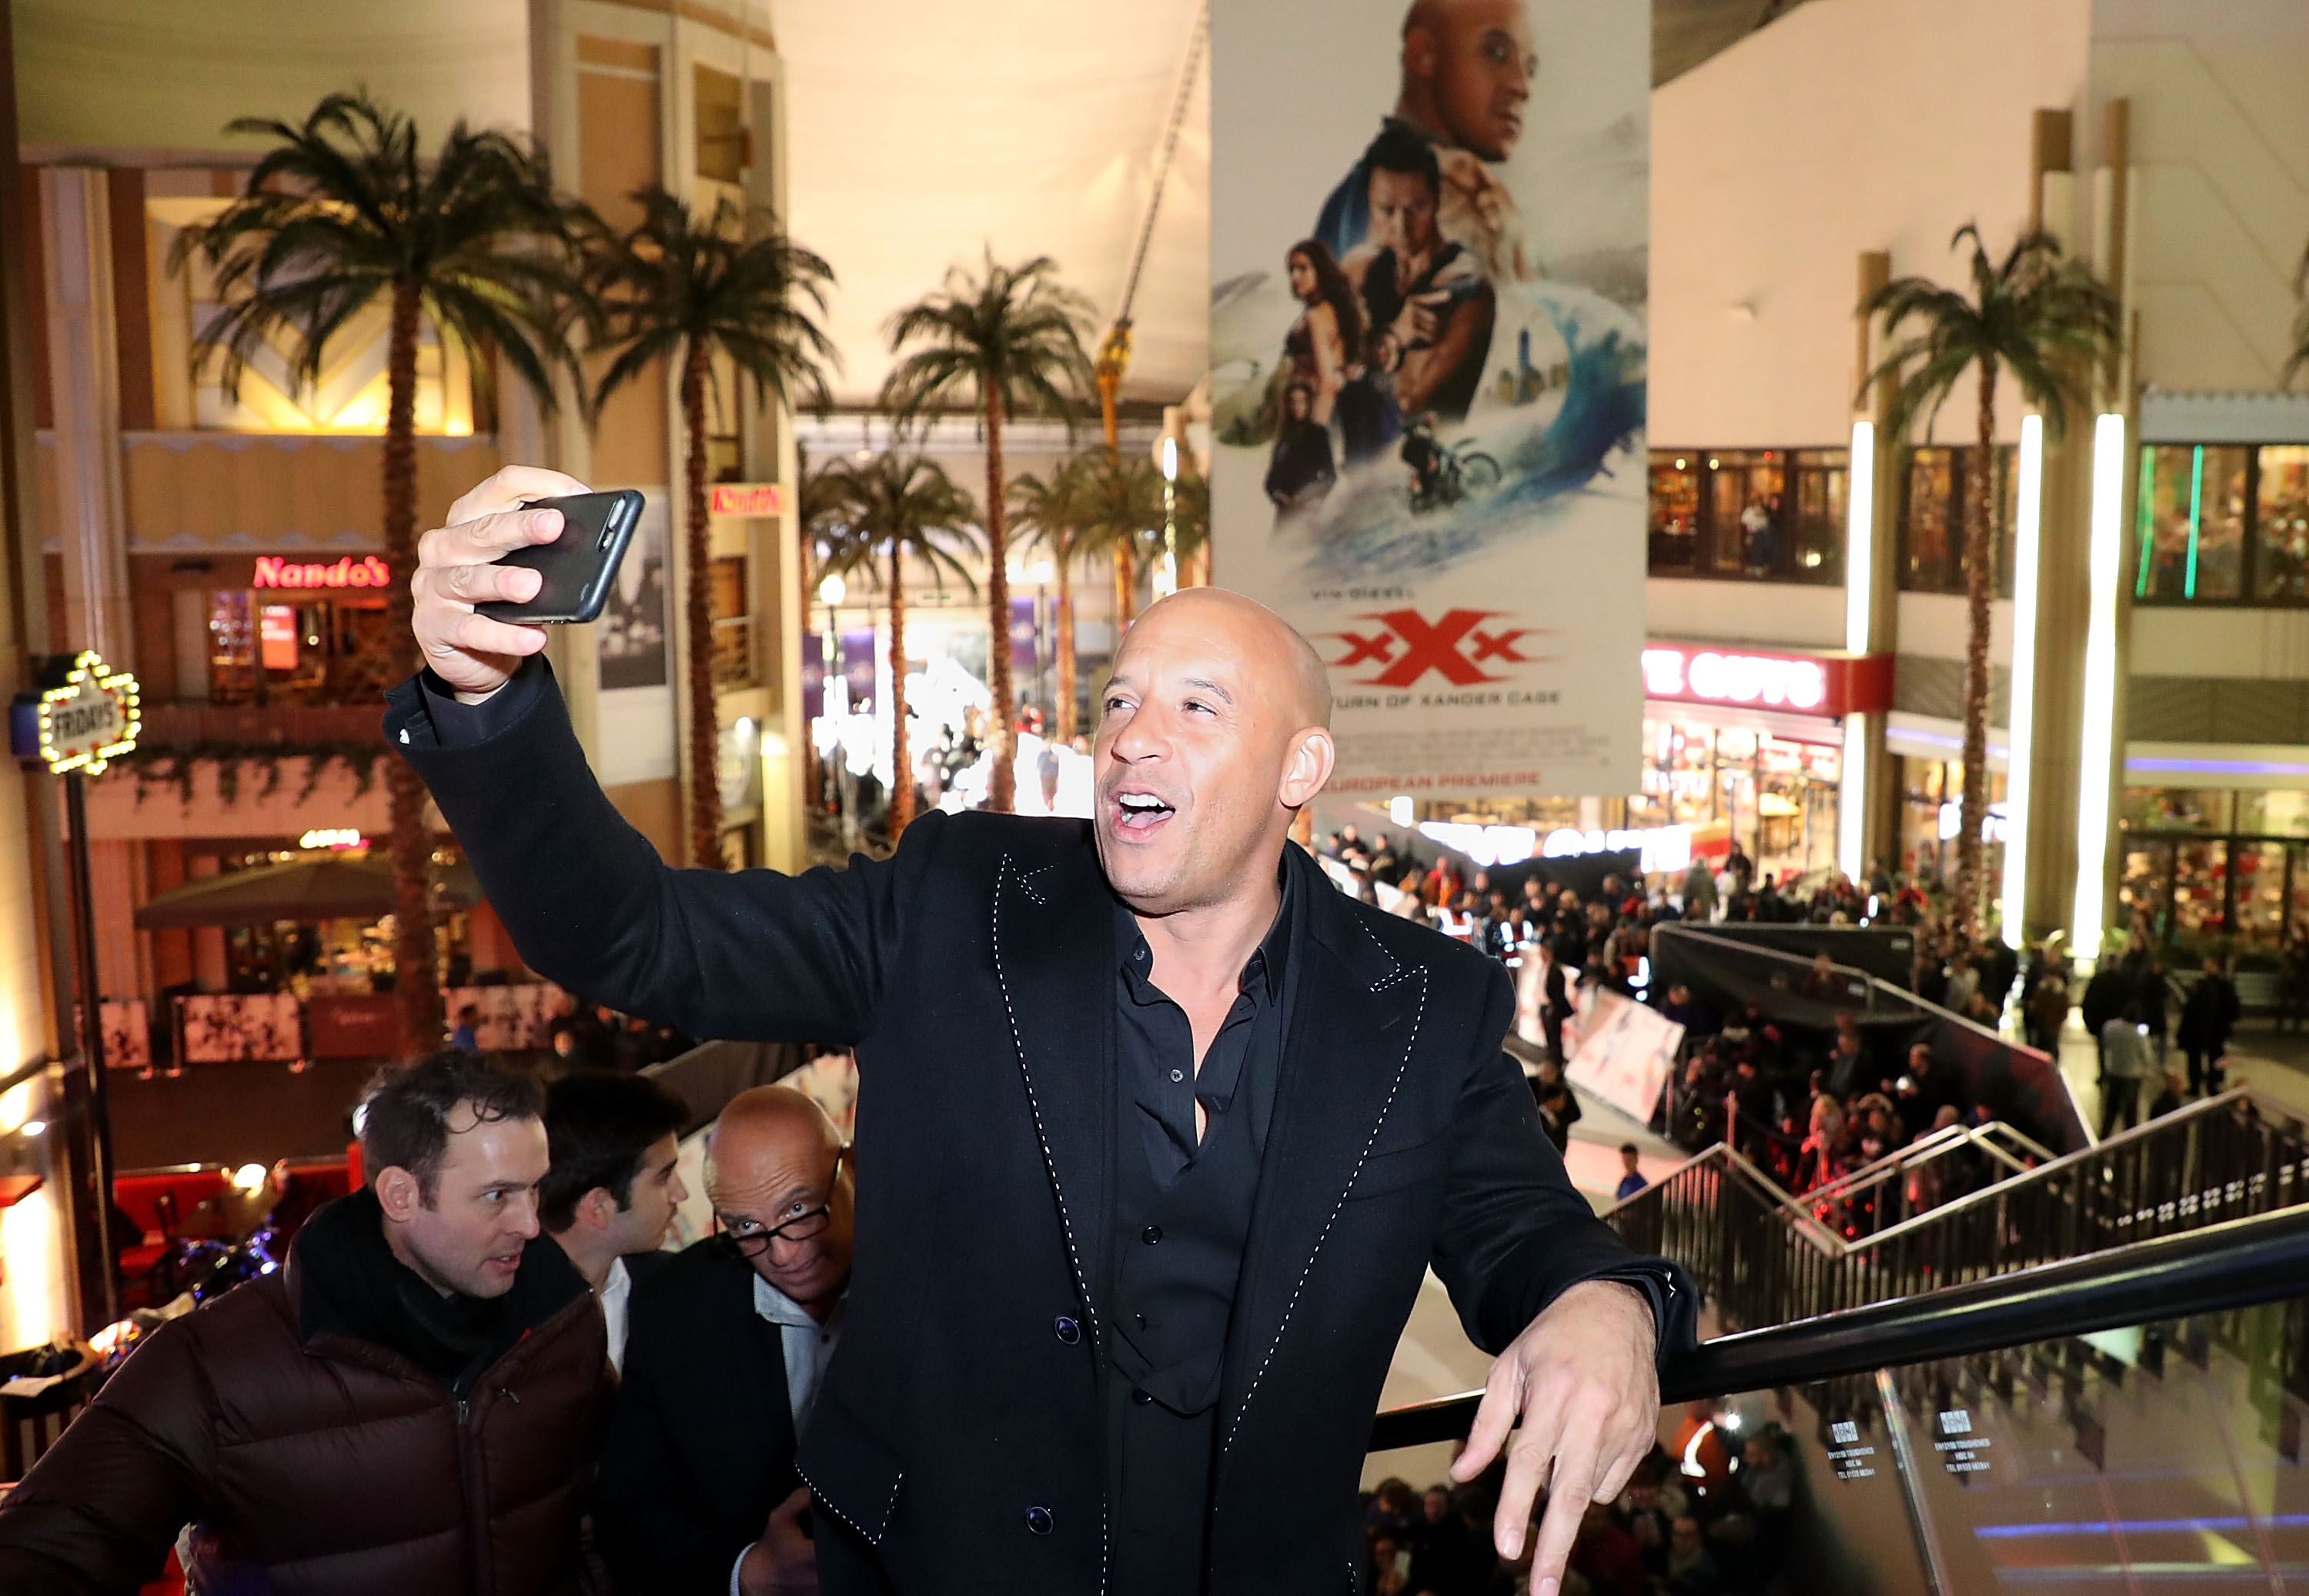 LONDON, ENGLAND - JANUARY 10: Vin Diesel attends the European Premiere of Paramount Pictures' 